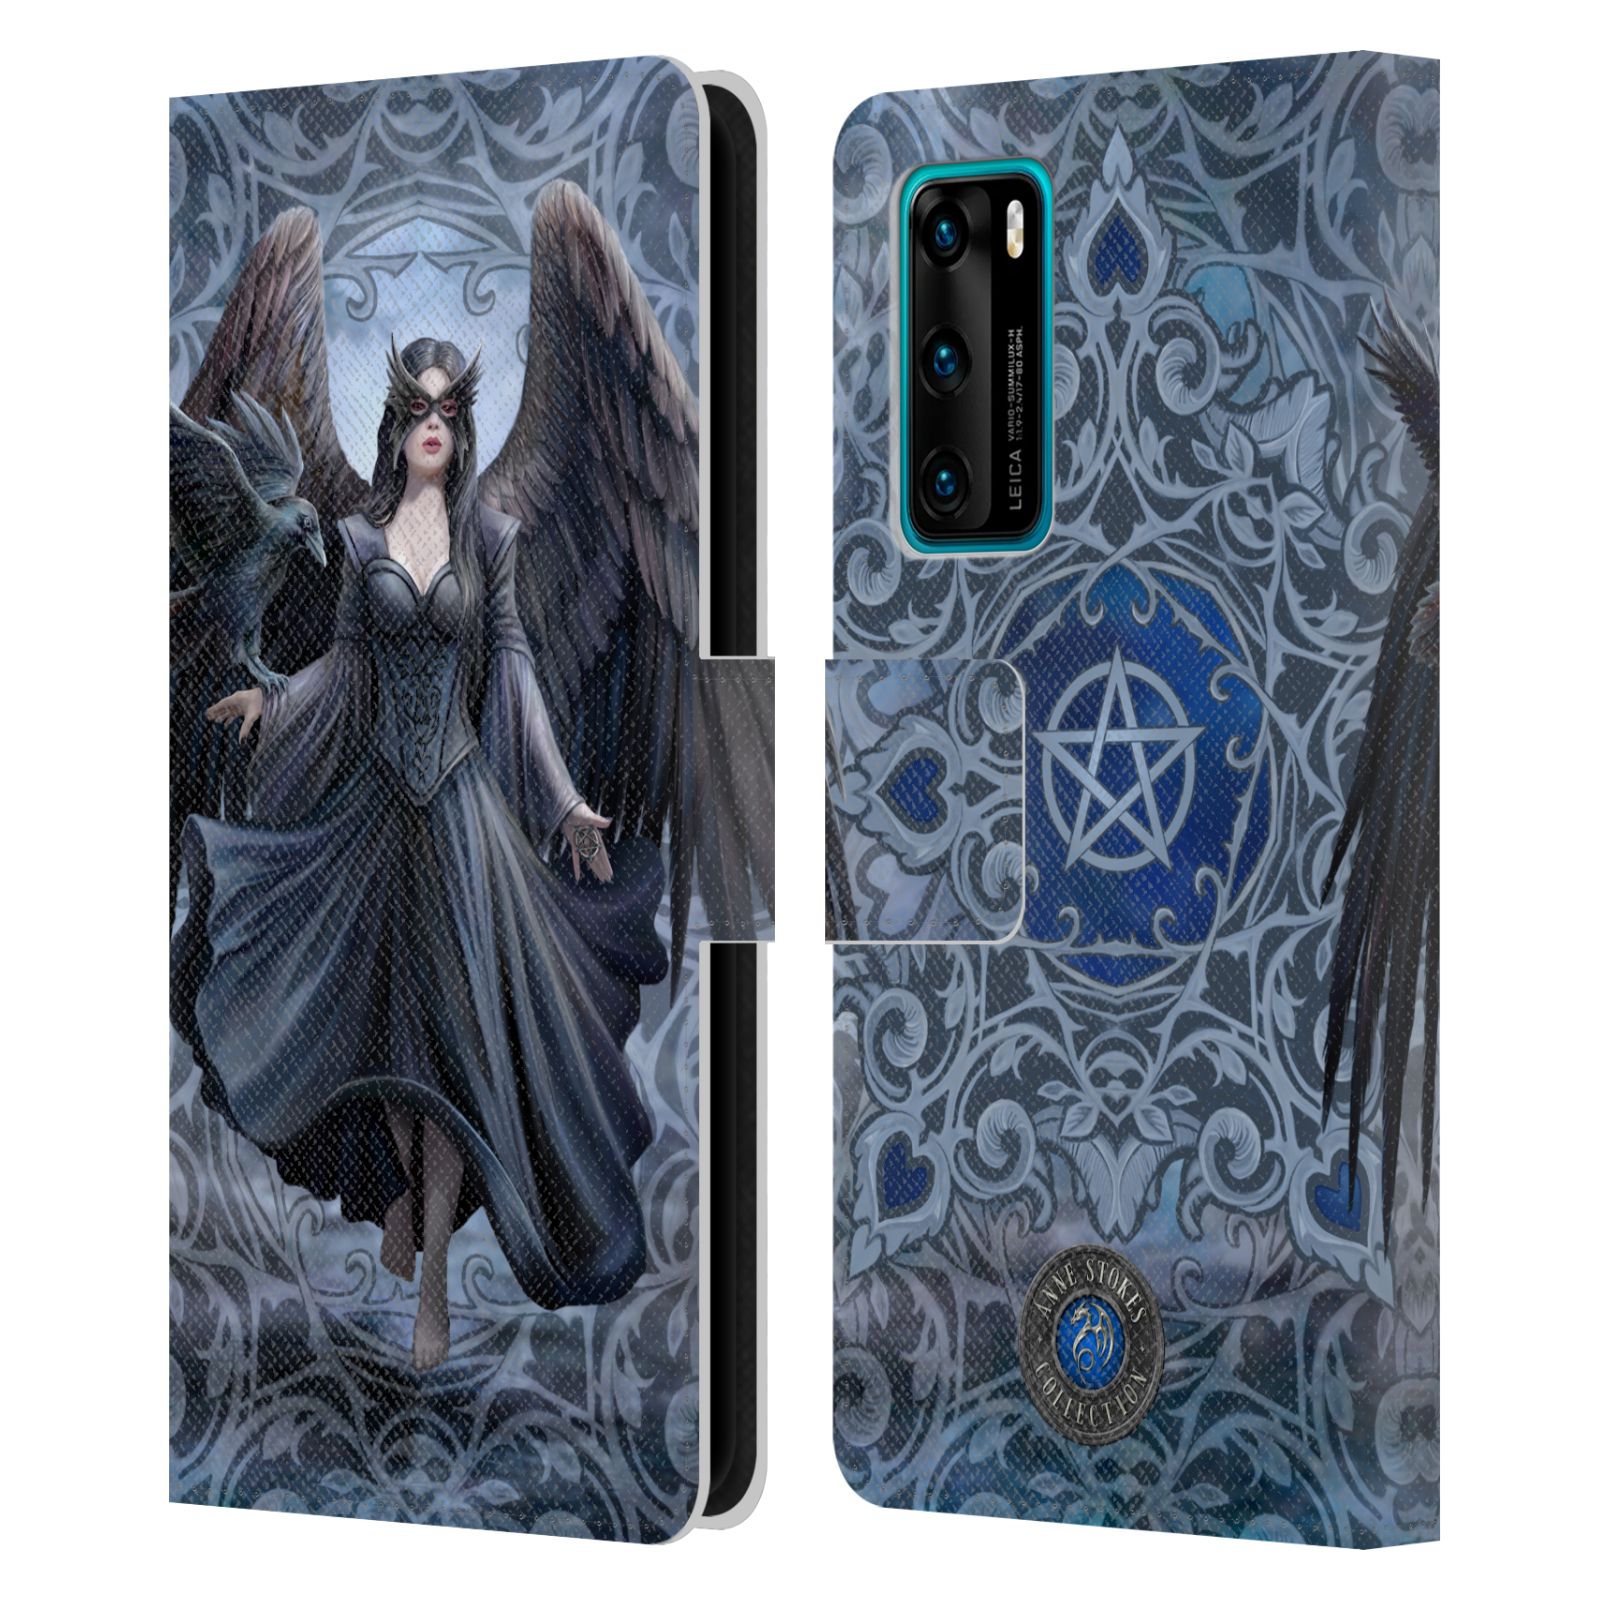 OFFICIAL ANNE STOKES RAVEN LEATHER PASSPORT HOLDER WALLET COVER CASE 